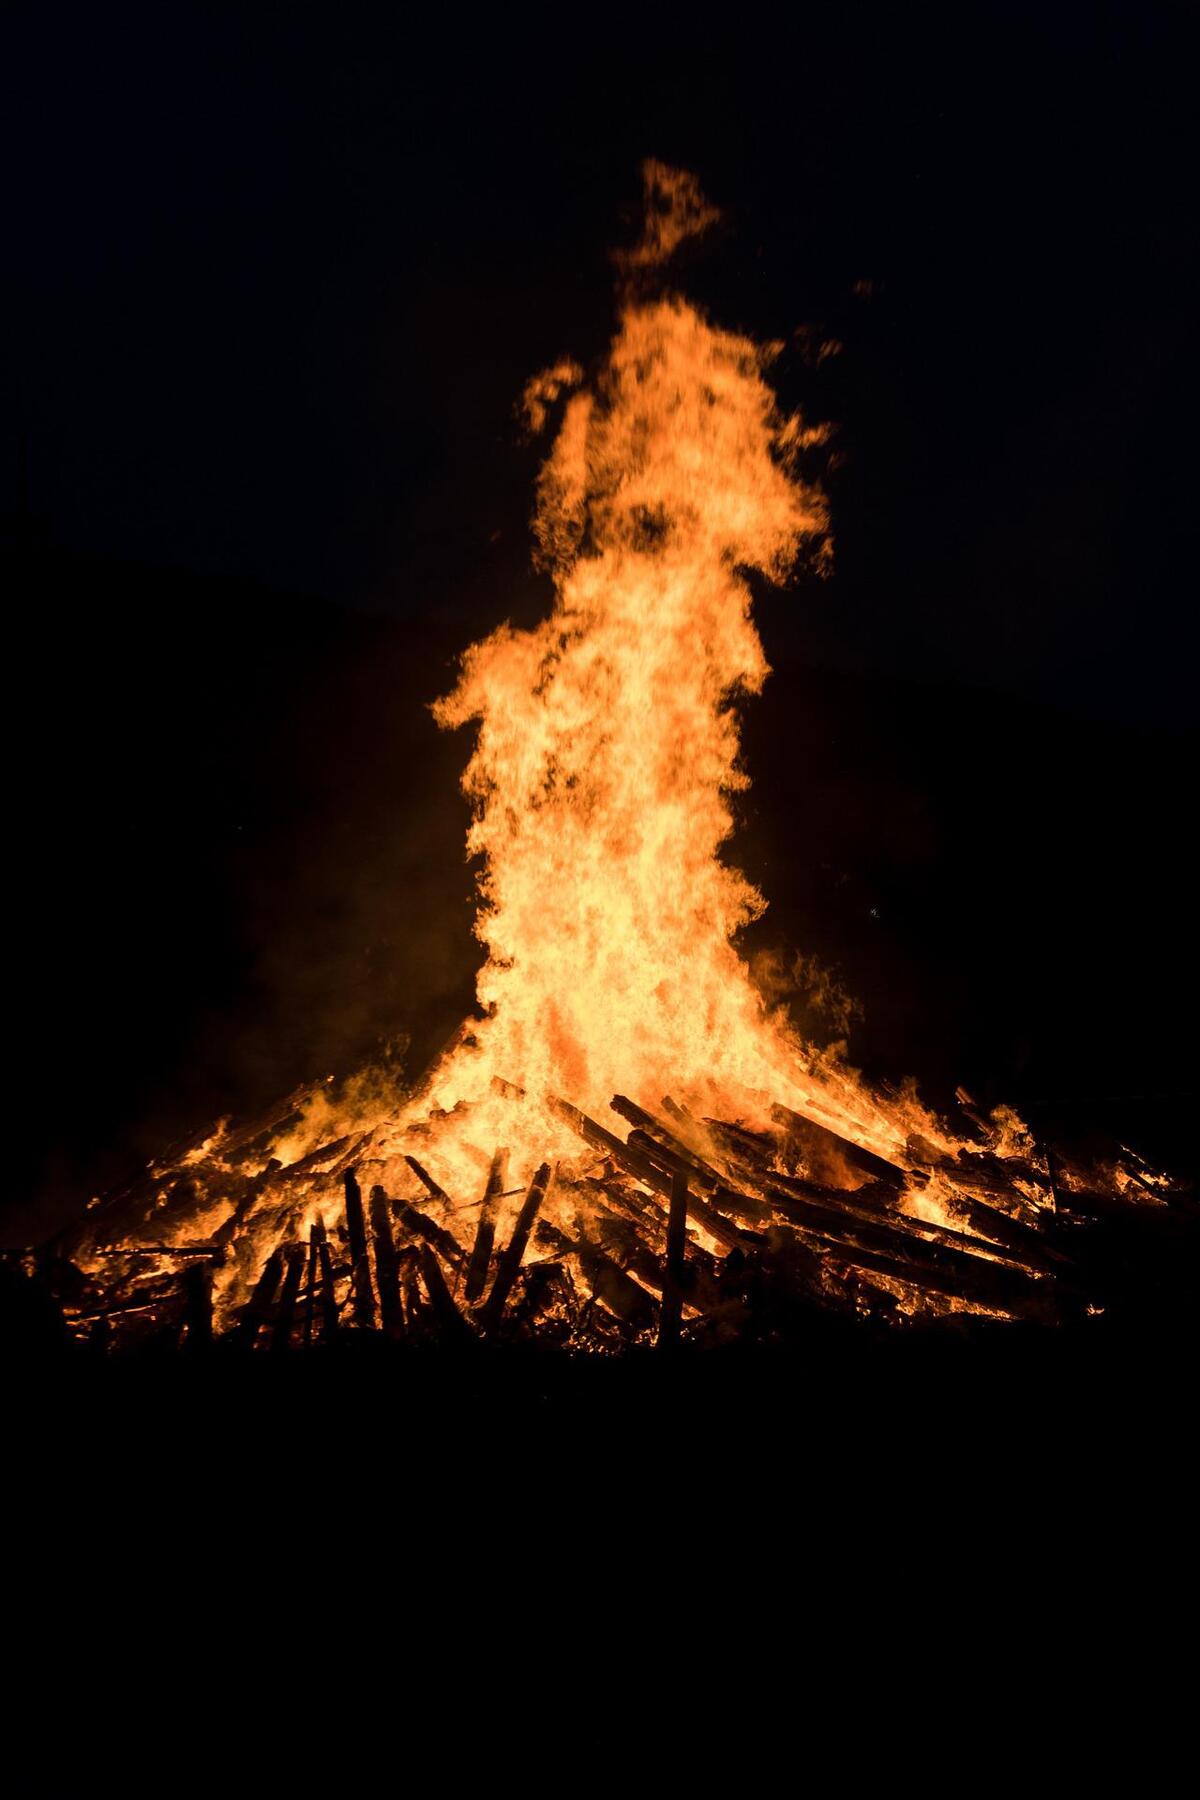 loderndes Lagerfeuer